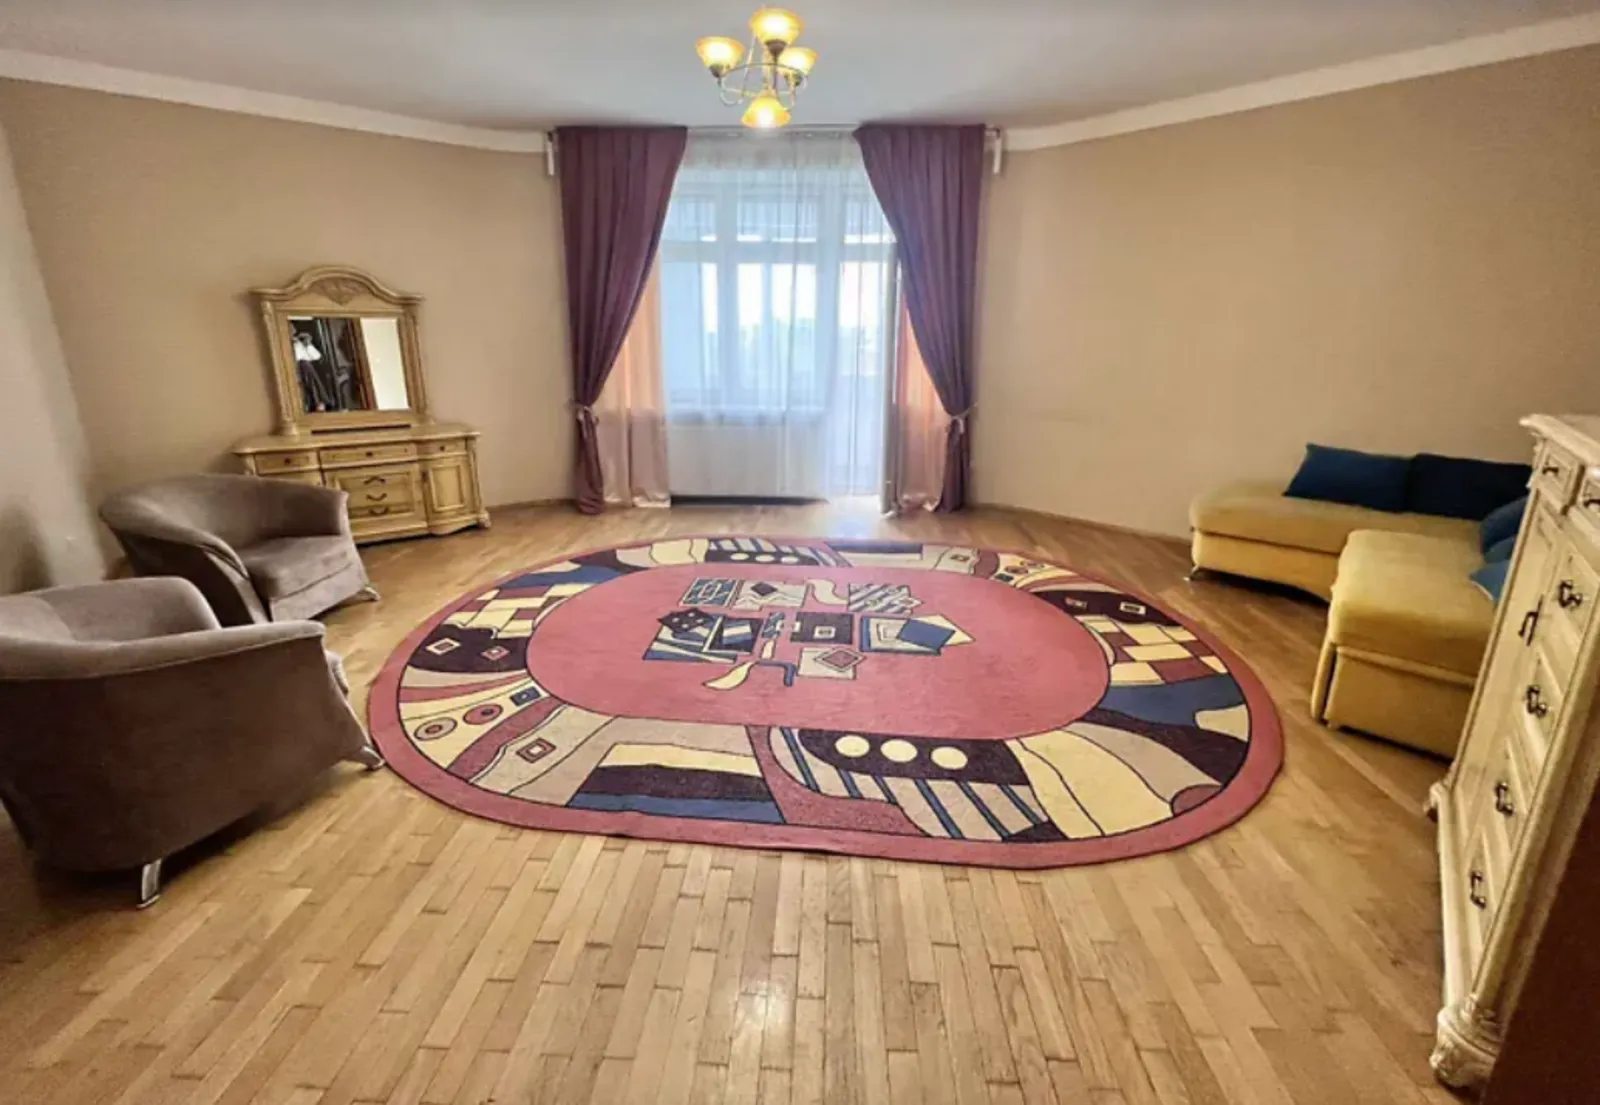 Apartment for rent. 3 rooms, 170 m², 6th floor/6 floors. Tsentr, Ternopil. 